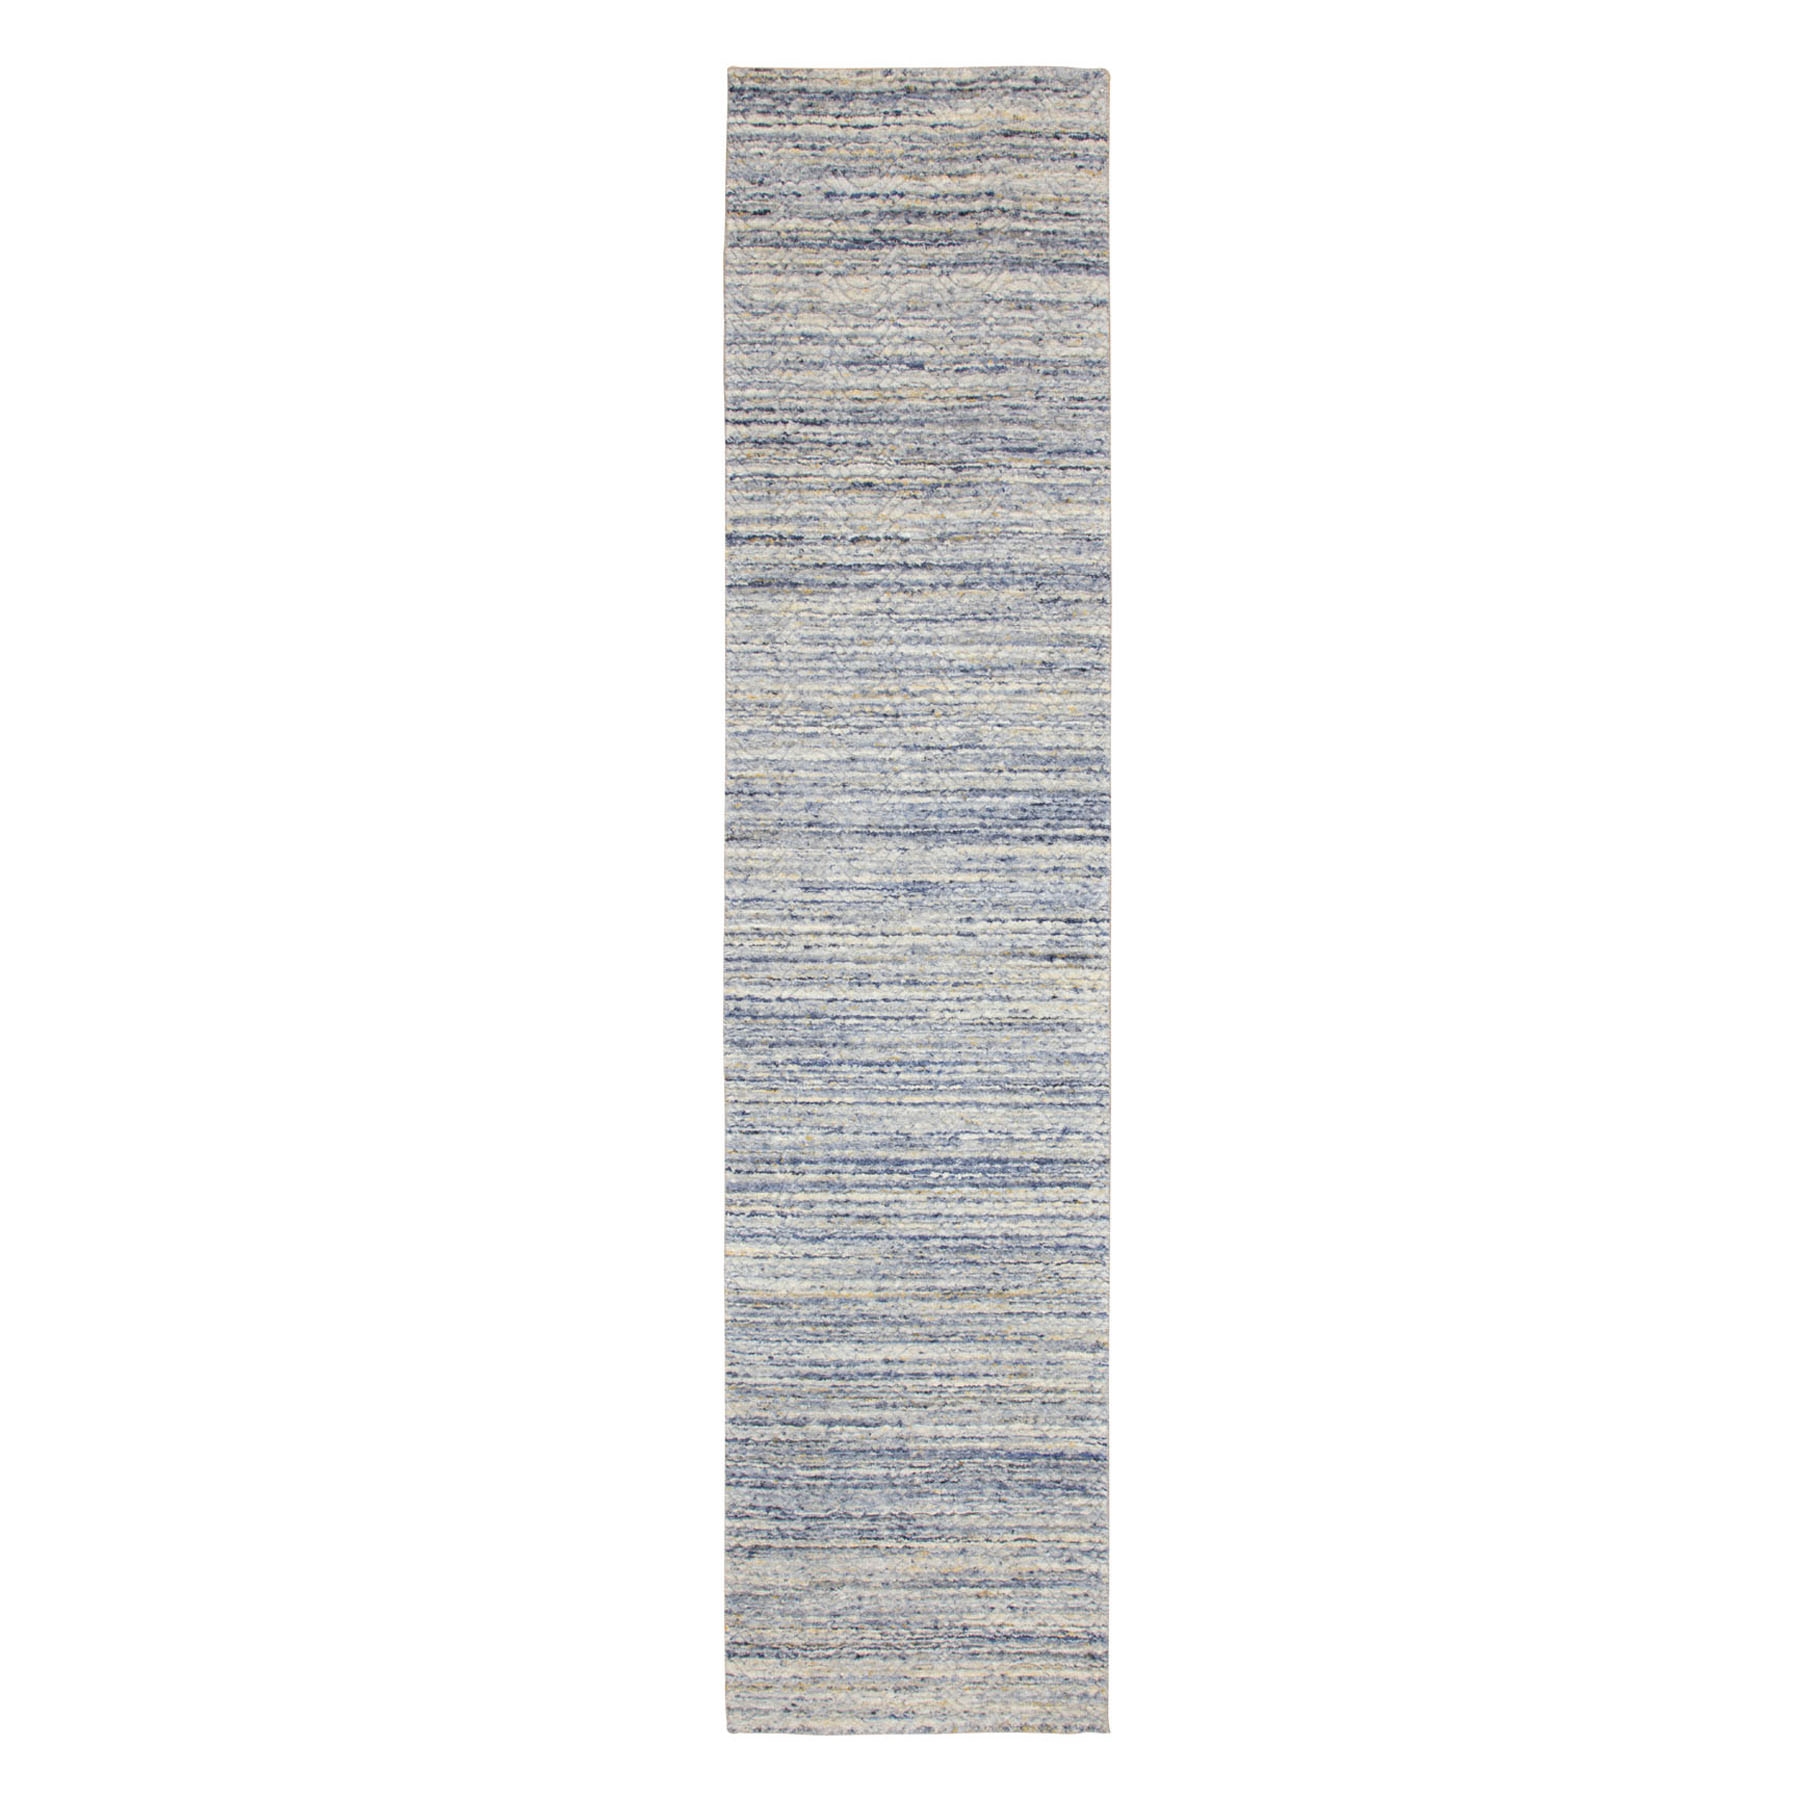 Modern & Contemporary Wool Hand-Woven Area Rug 2'6